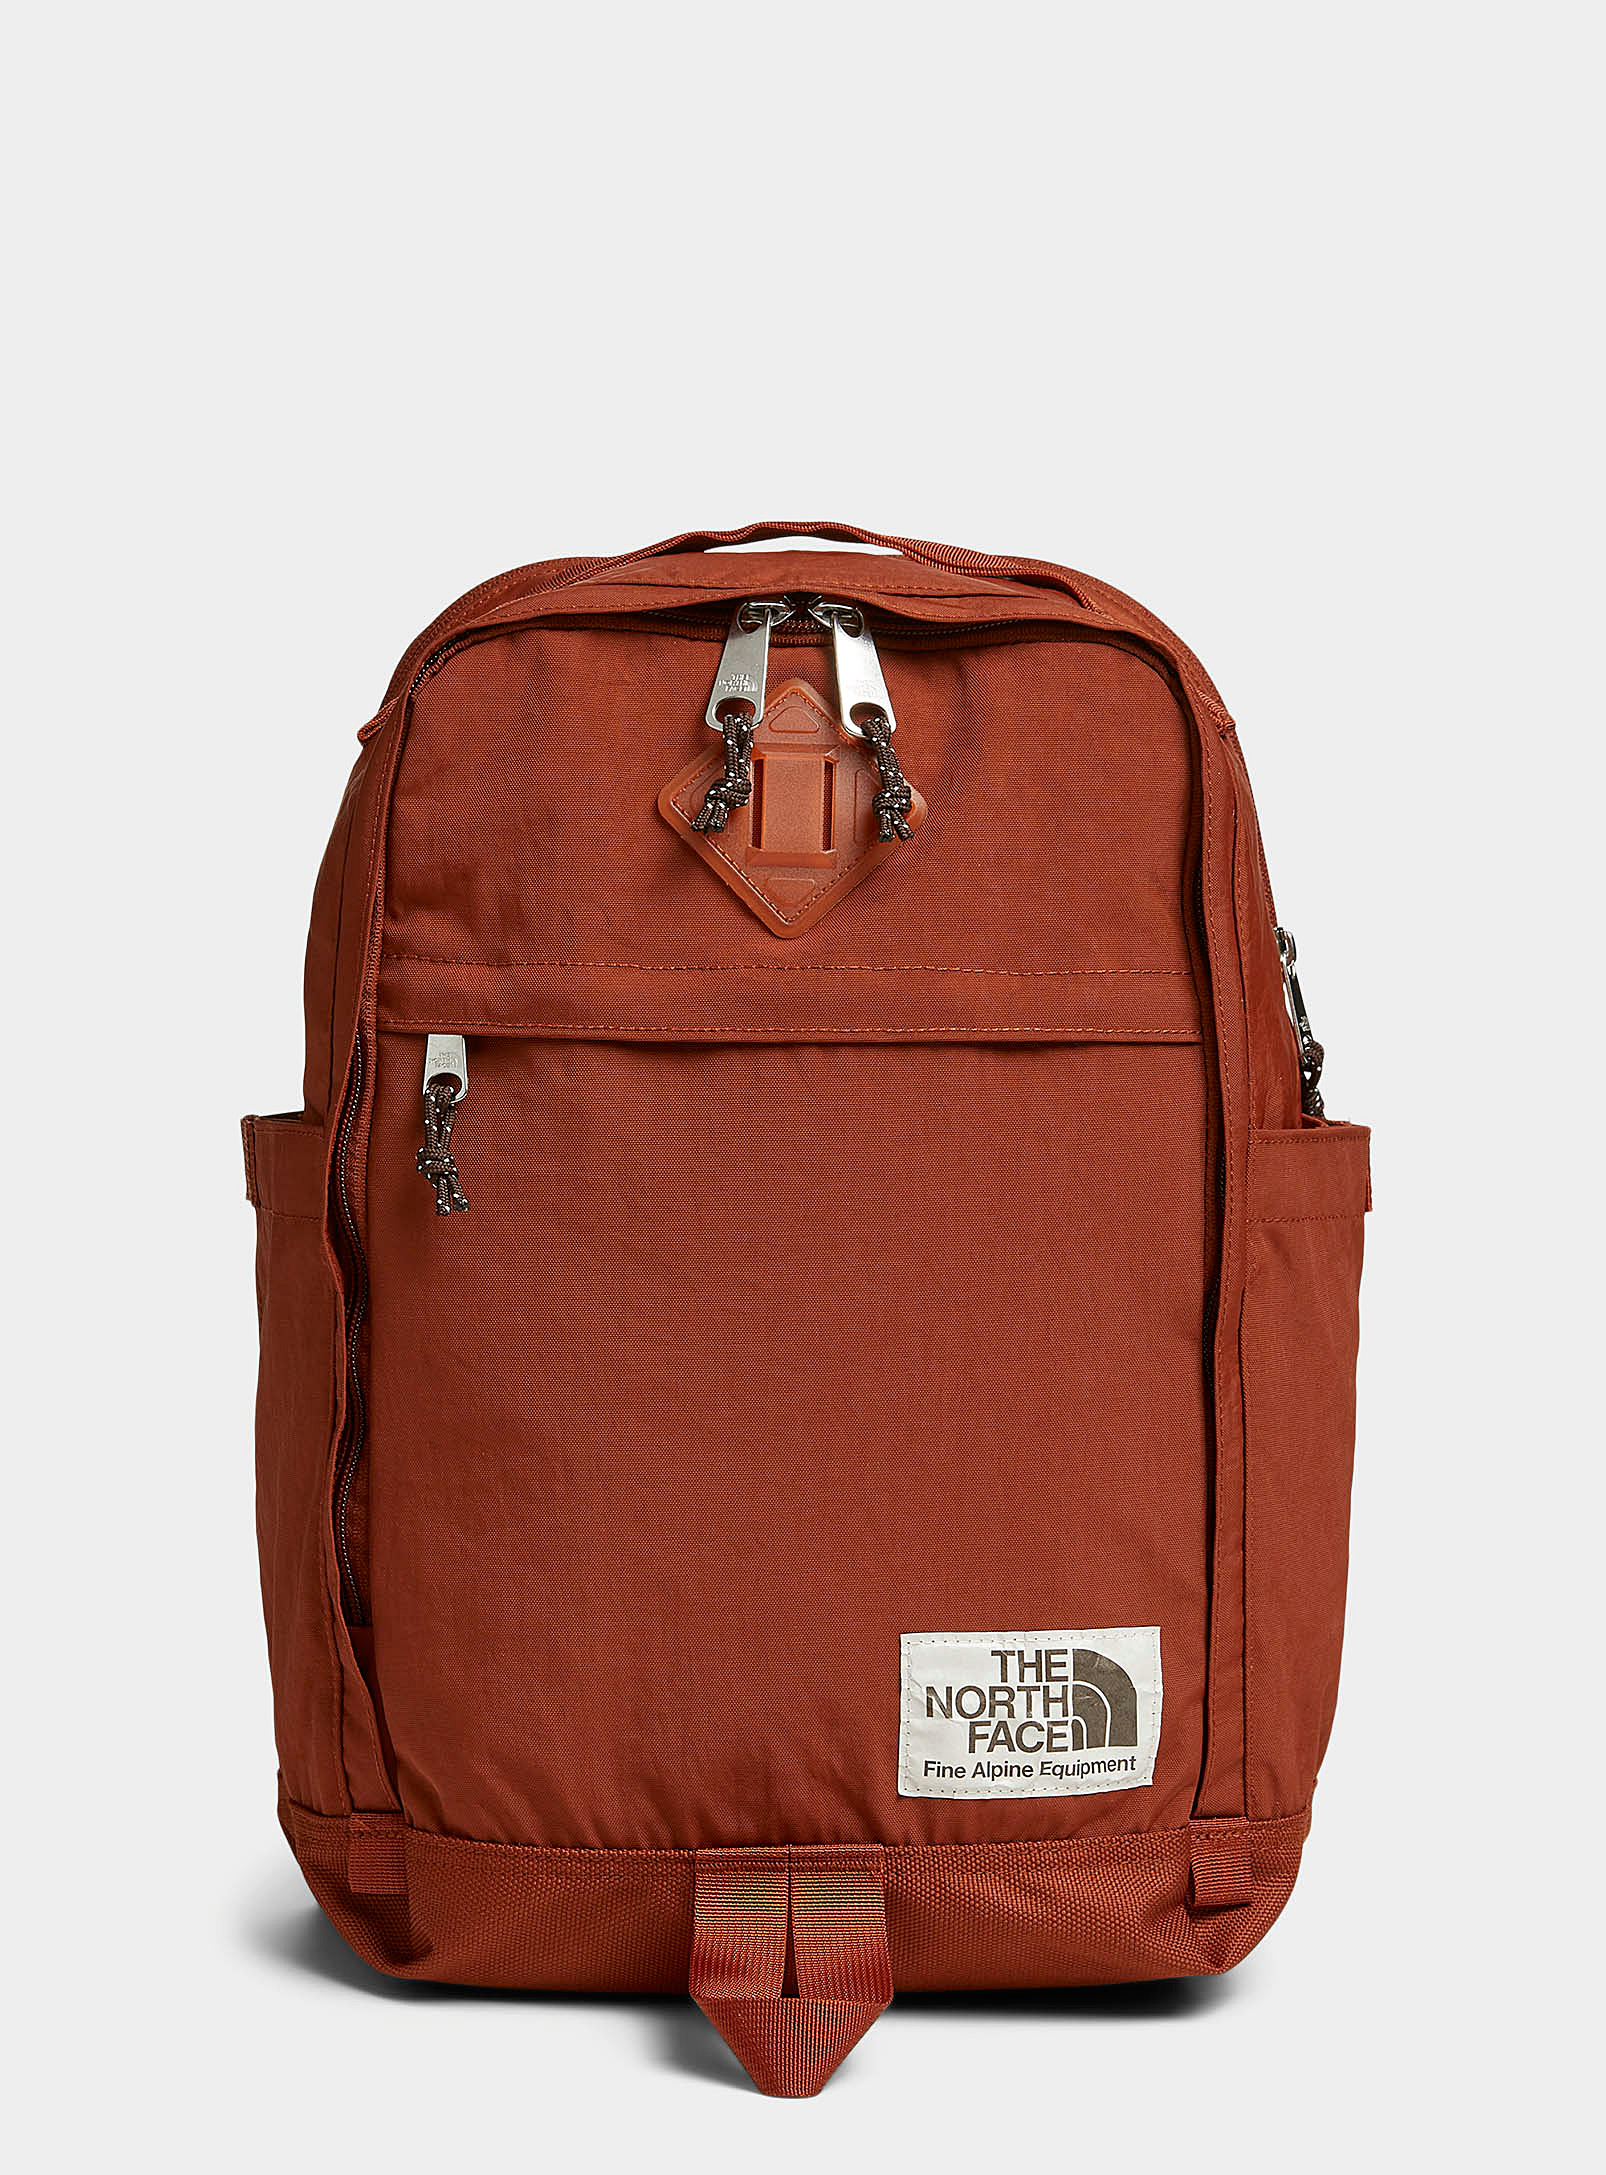 The North Face Berkeley Backpack In Brown